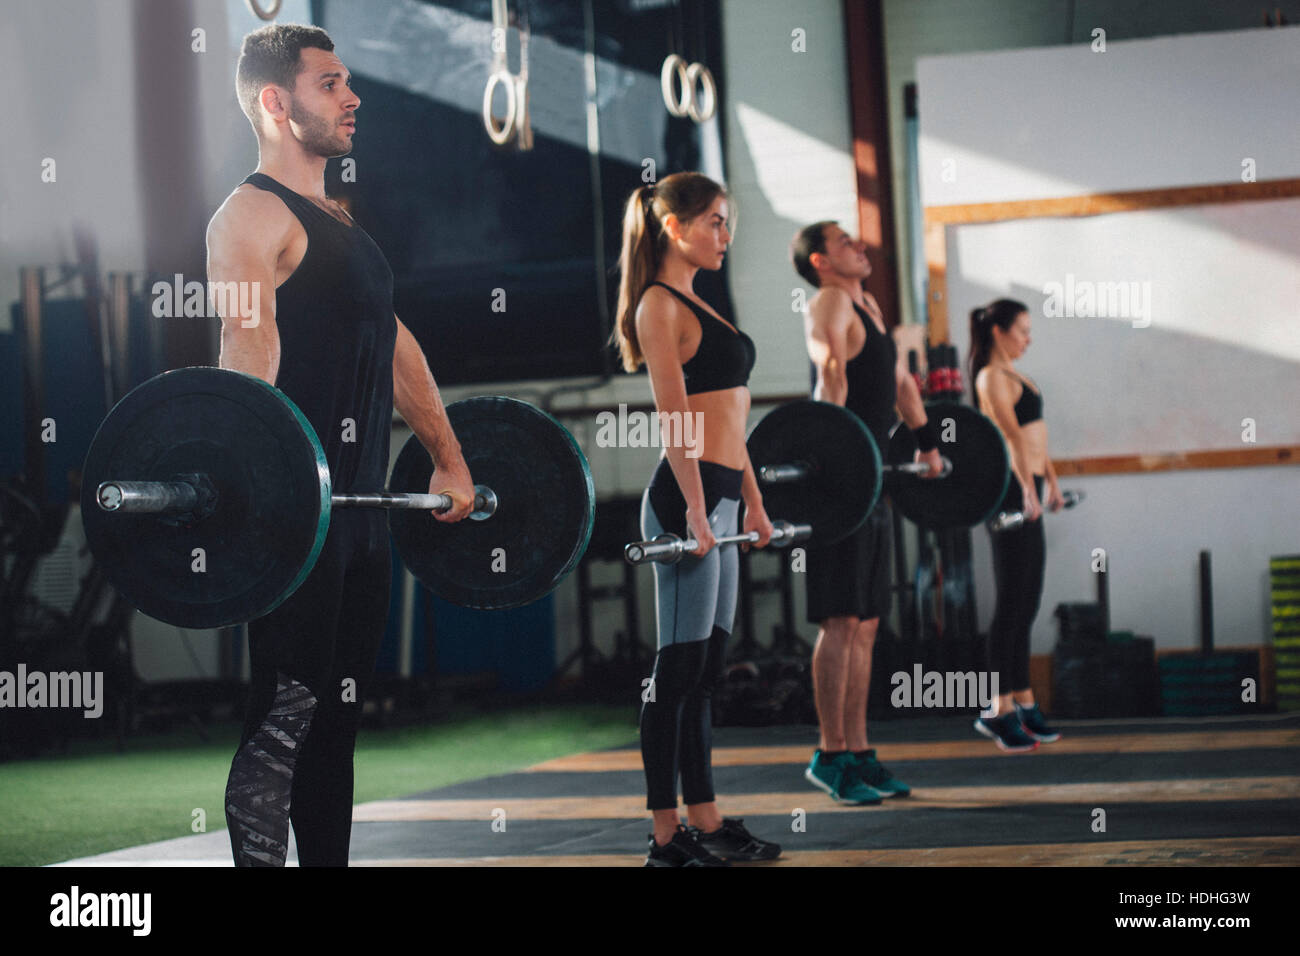 Side view of male and female athletes lifting barbells at health club Stock Photo